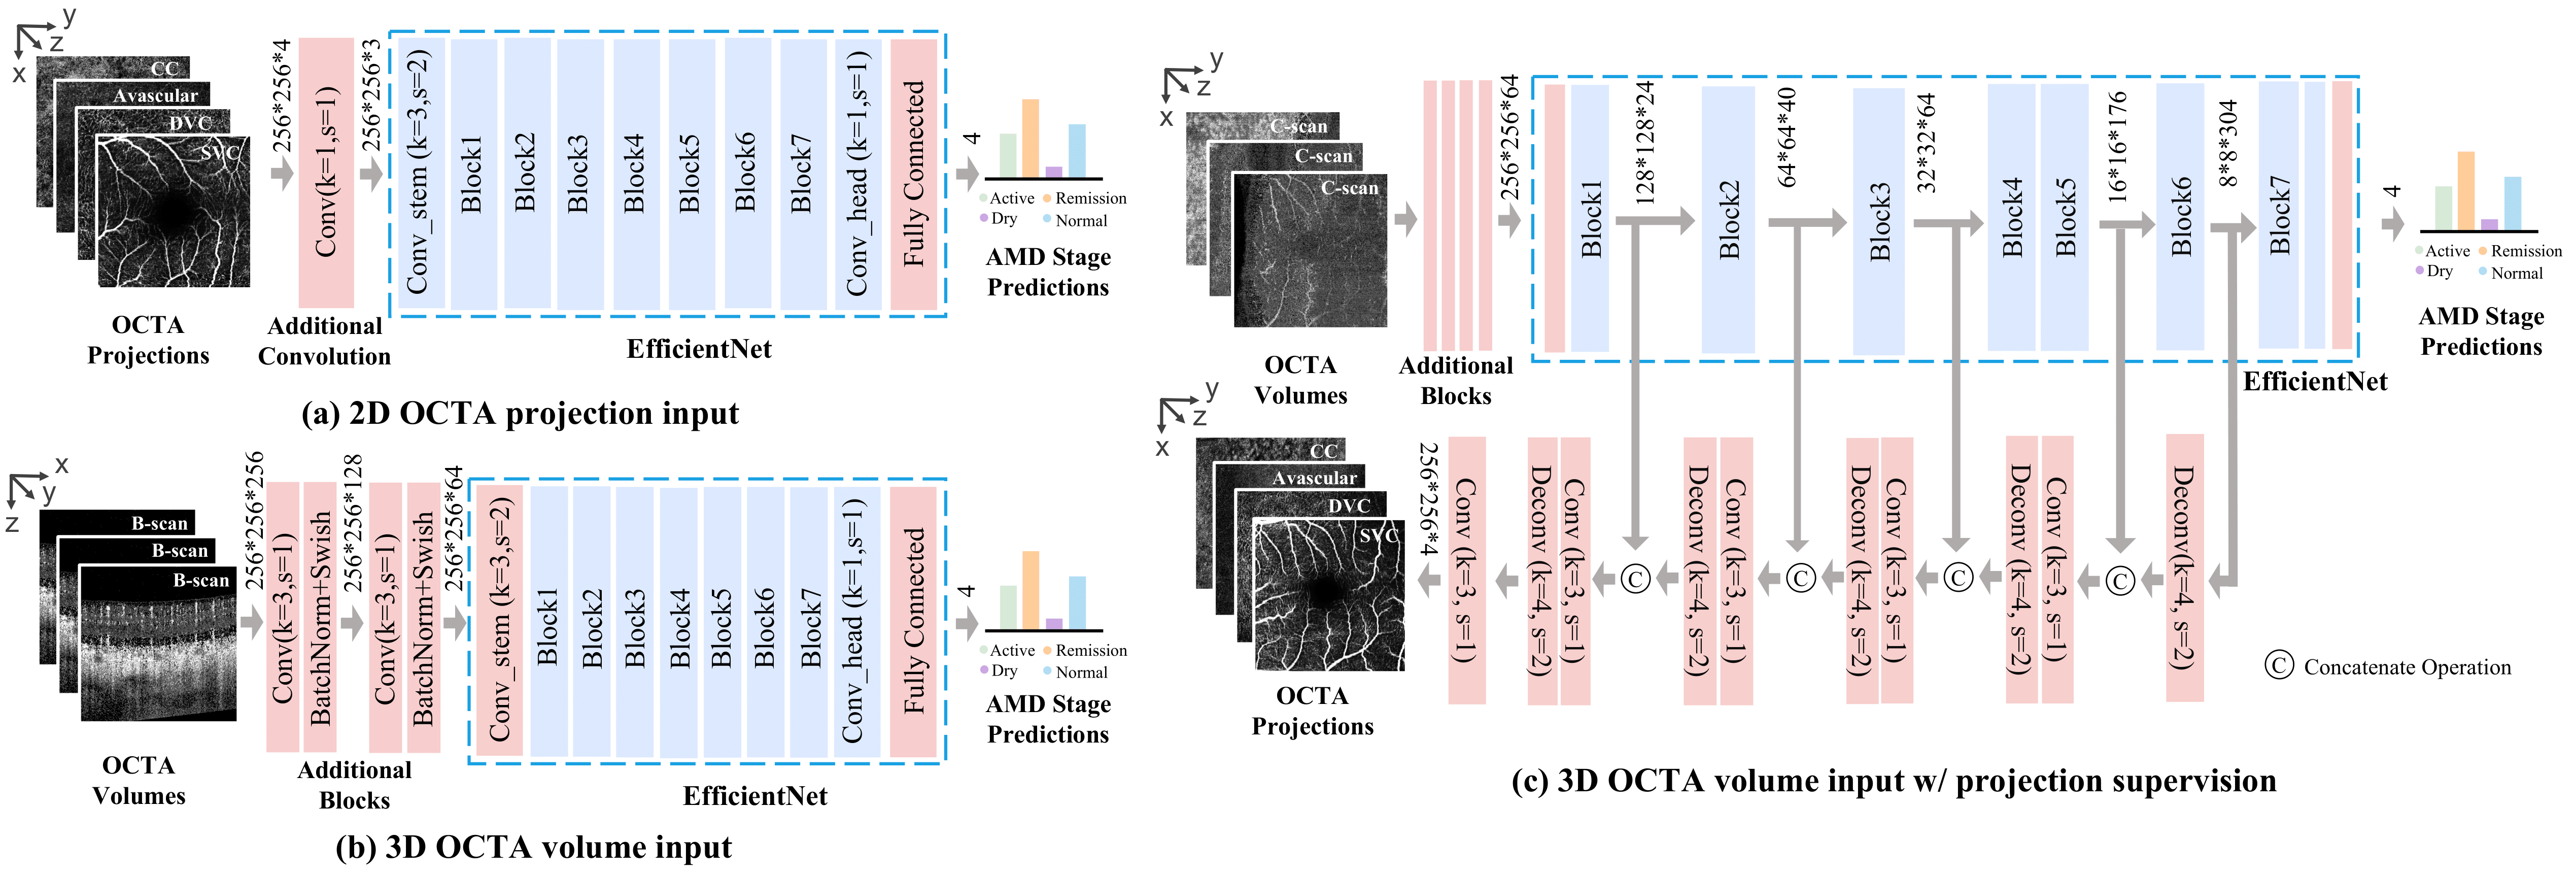 The proposed network structures for (a) 2D projections, (b) 3D volumes and (c) 3D volumes with 2D projection supervision. The layers in blue have pretrained weights while those in red are trained from scratch.